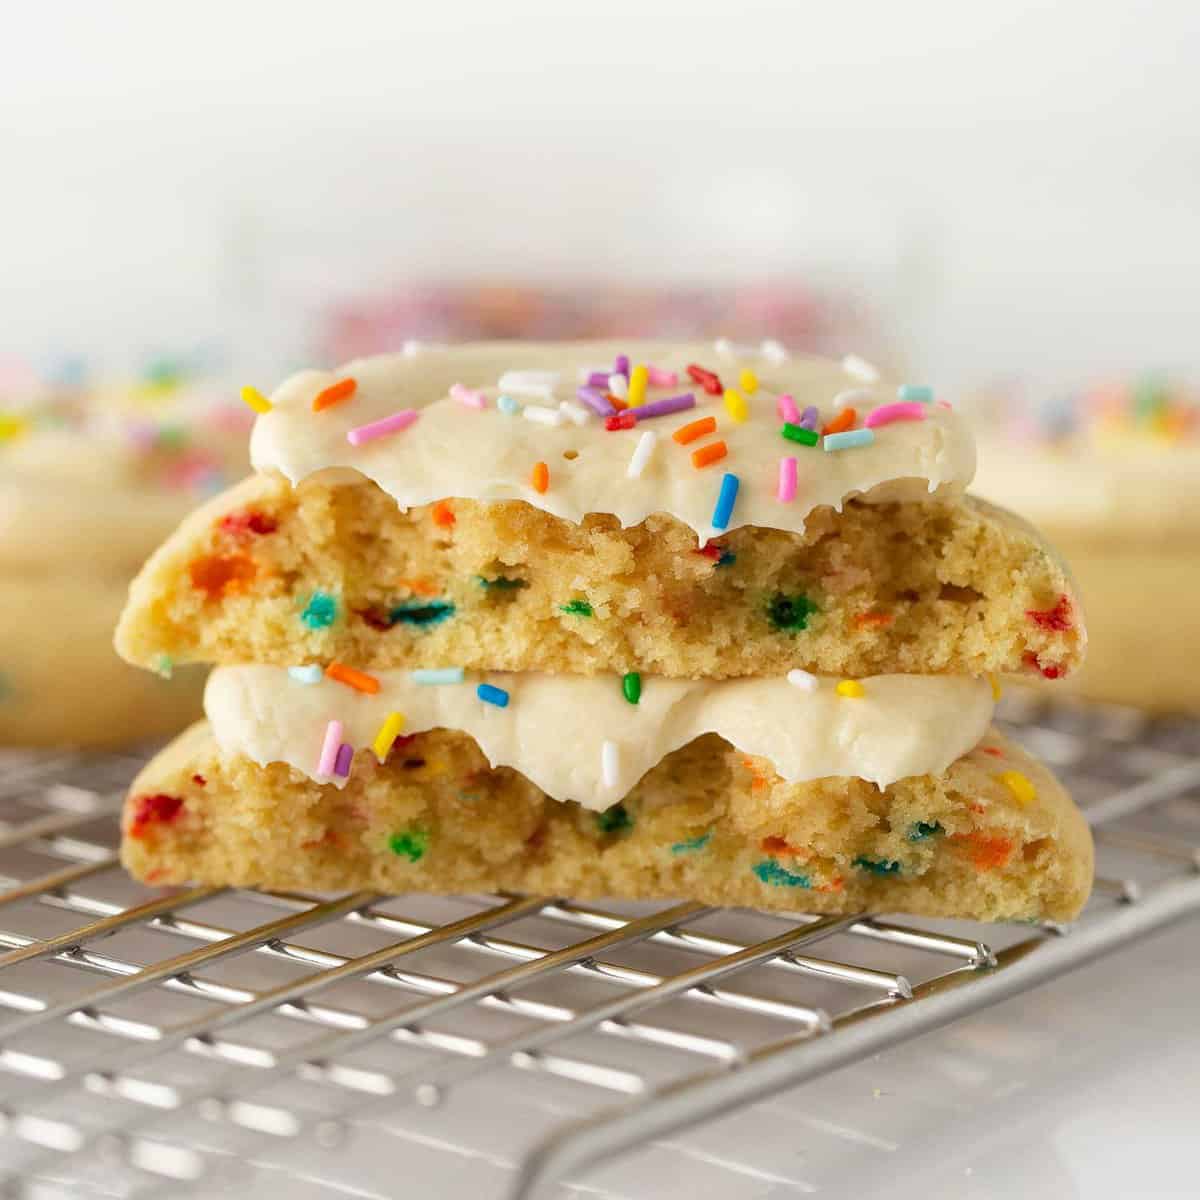 stack of birthday cake cookies cut in half to show texture